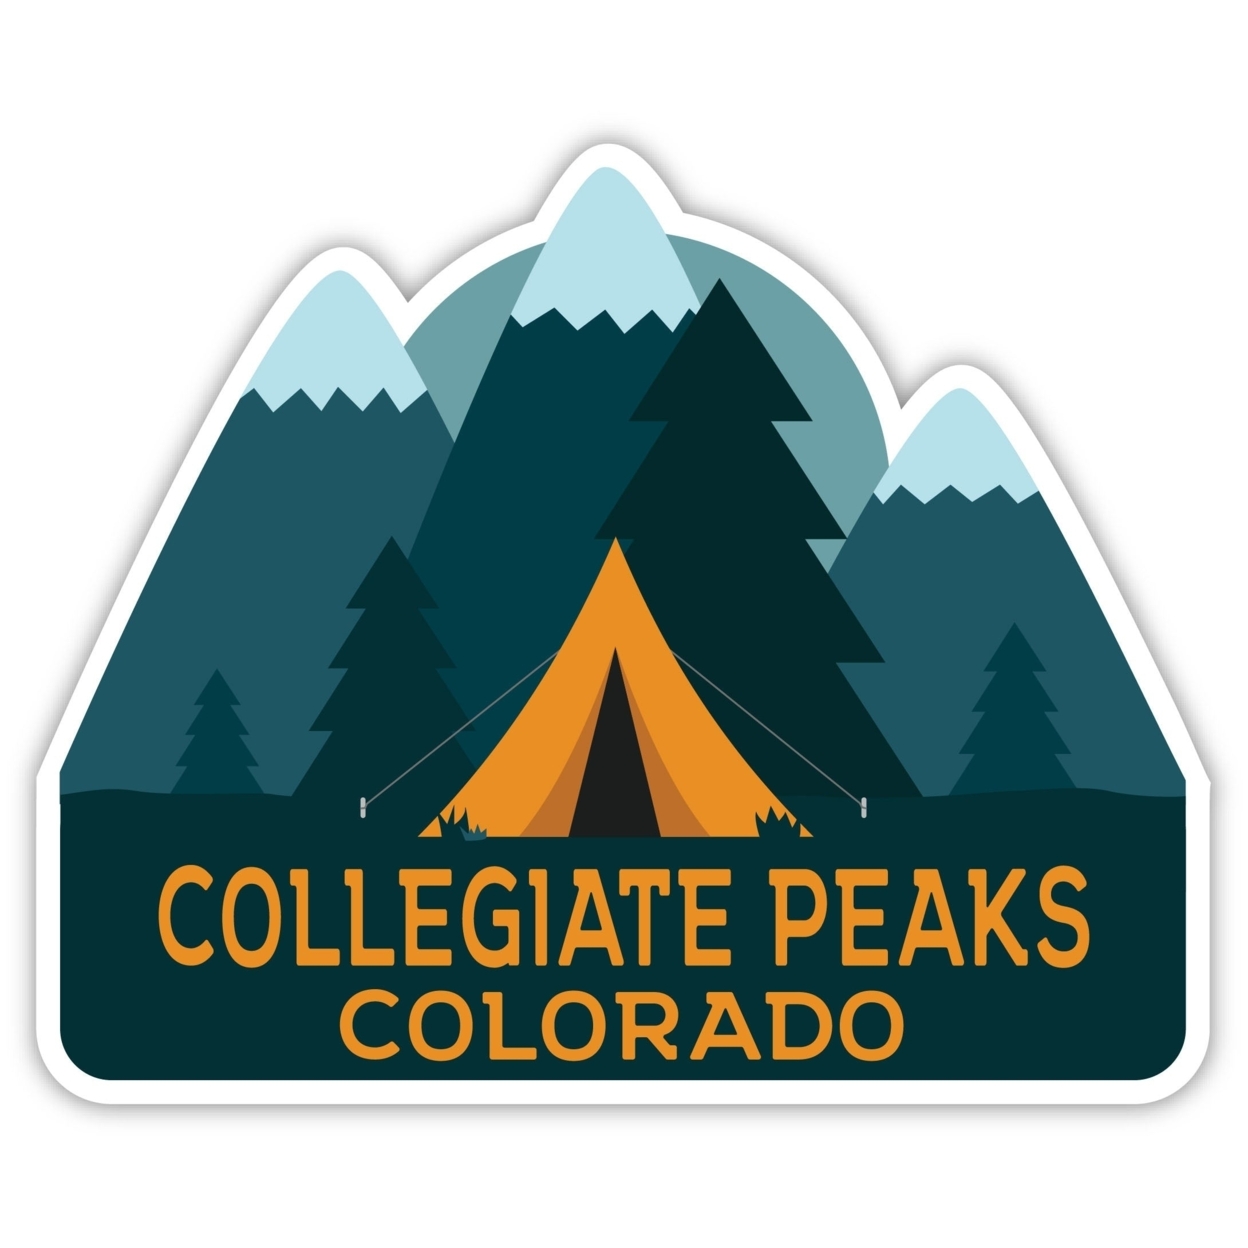 Collegiate Peaks Colorado Souvenir Decorative Stickers (Choose Theme And Size) - 4-Pack, 2-Inch, Great Outdoors